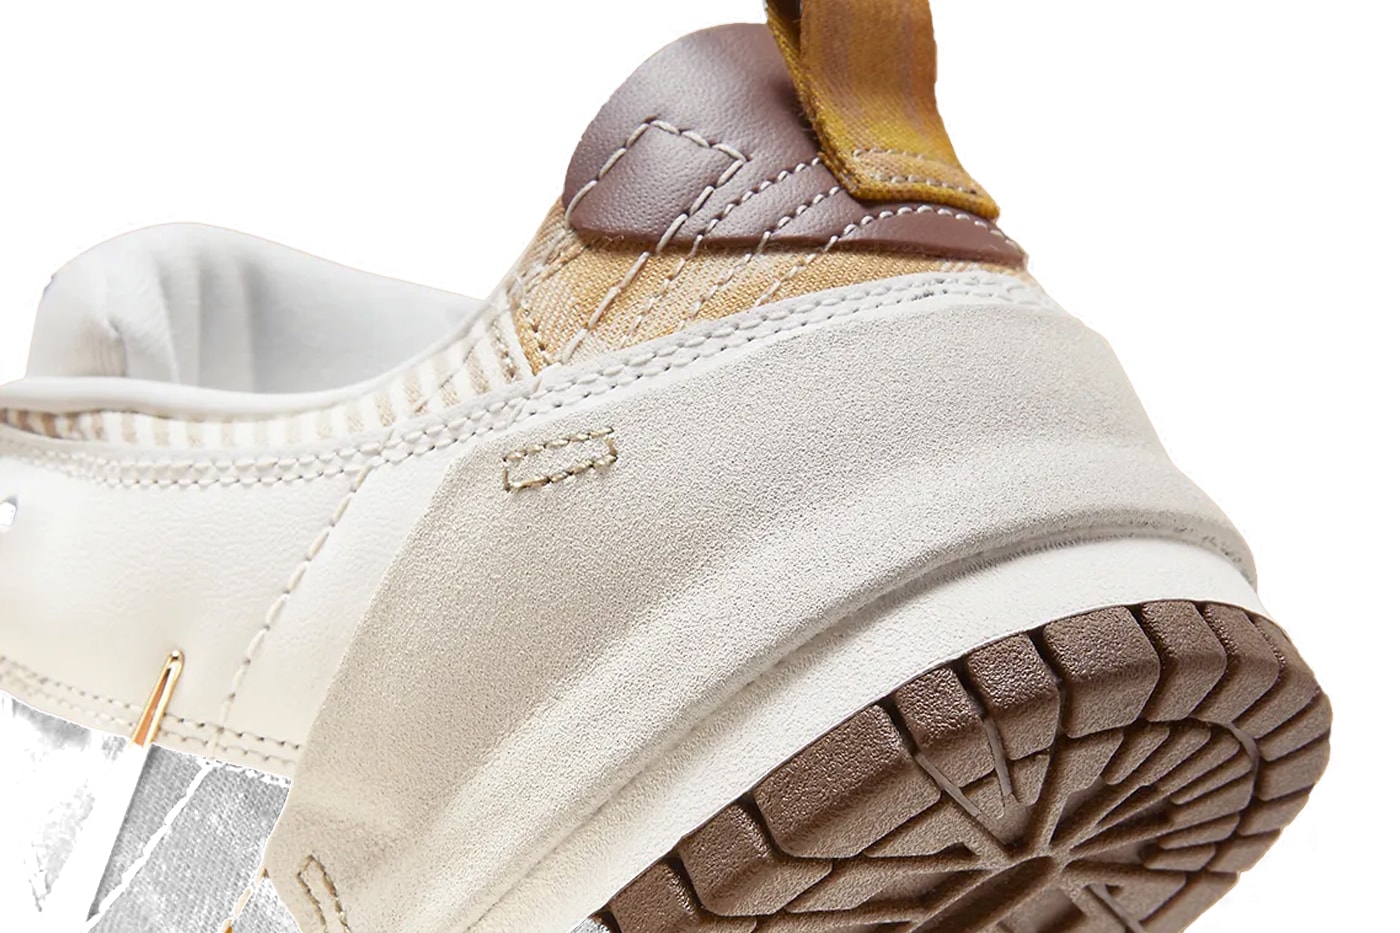 Nike Dunk Low Disrupt 2 Receives a "Plaid" Makeover FV3640-071 gold tan brown swoosh low top 